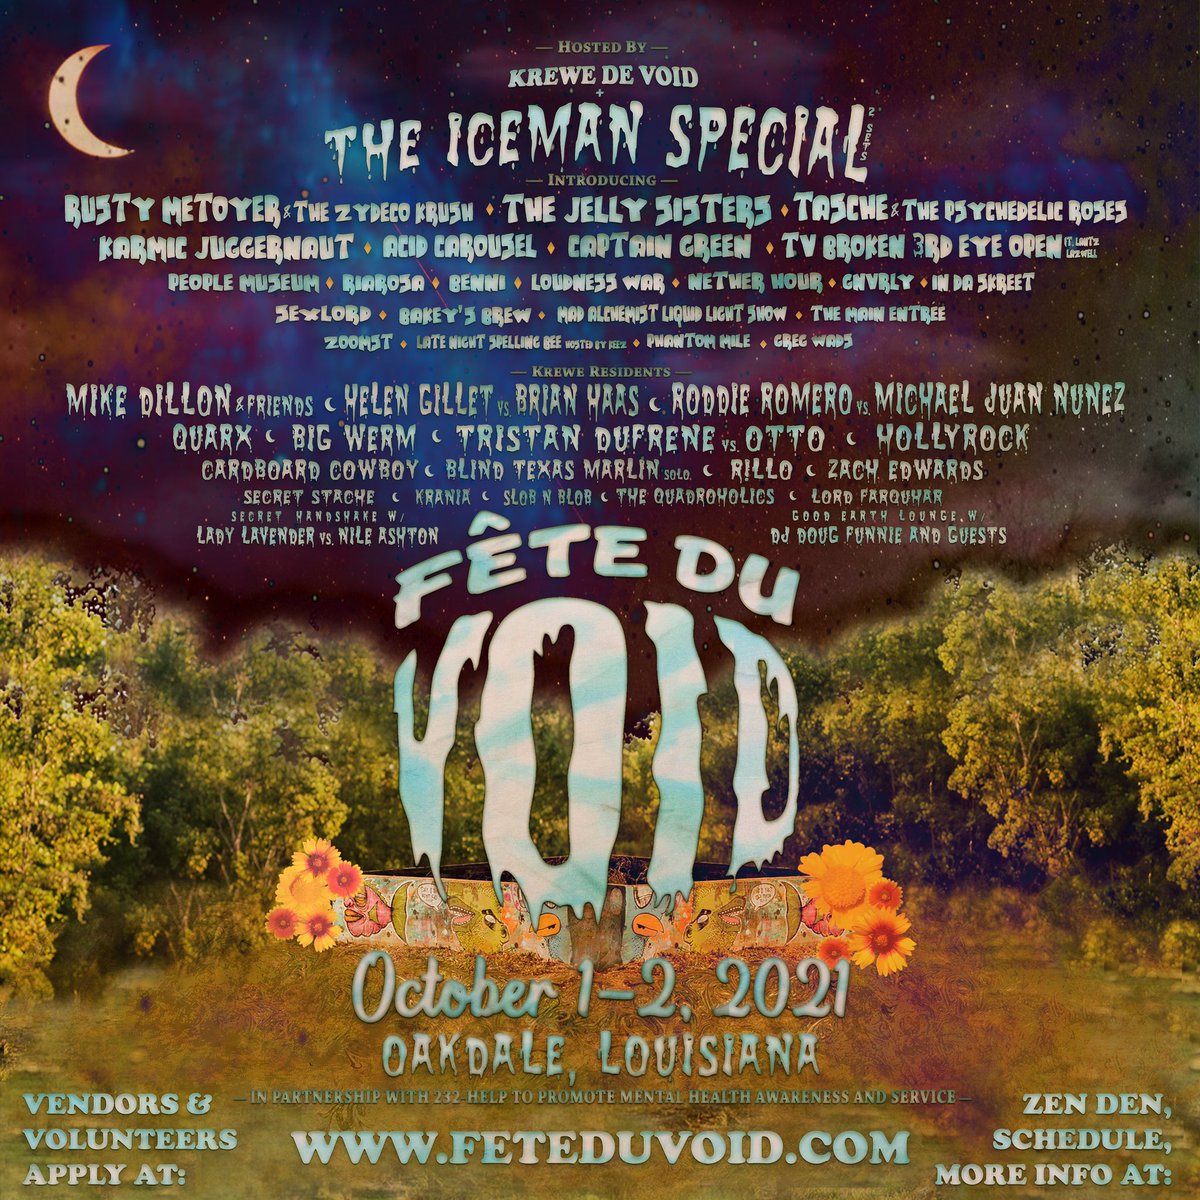 we are beyond excited to be playing @feteduvoid this october ⚡️ 

fete du void is a day/night camping, music, art, and wellness experience in oakdale, LA 🌳 

thank you to @theicemanspecial & #krewedevoid for having us 👽 
#fêteduvoid